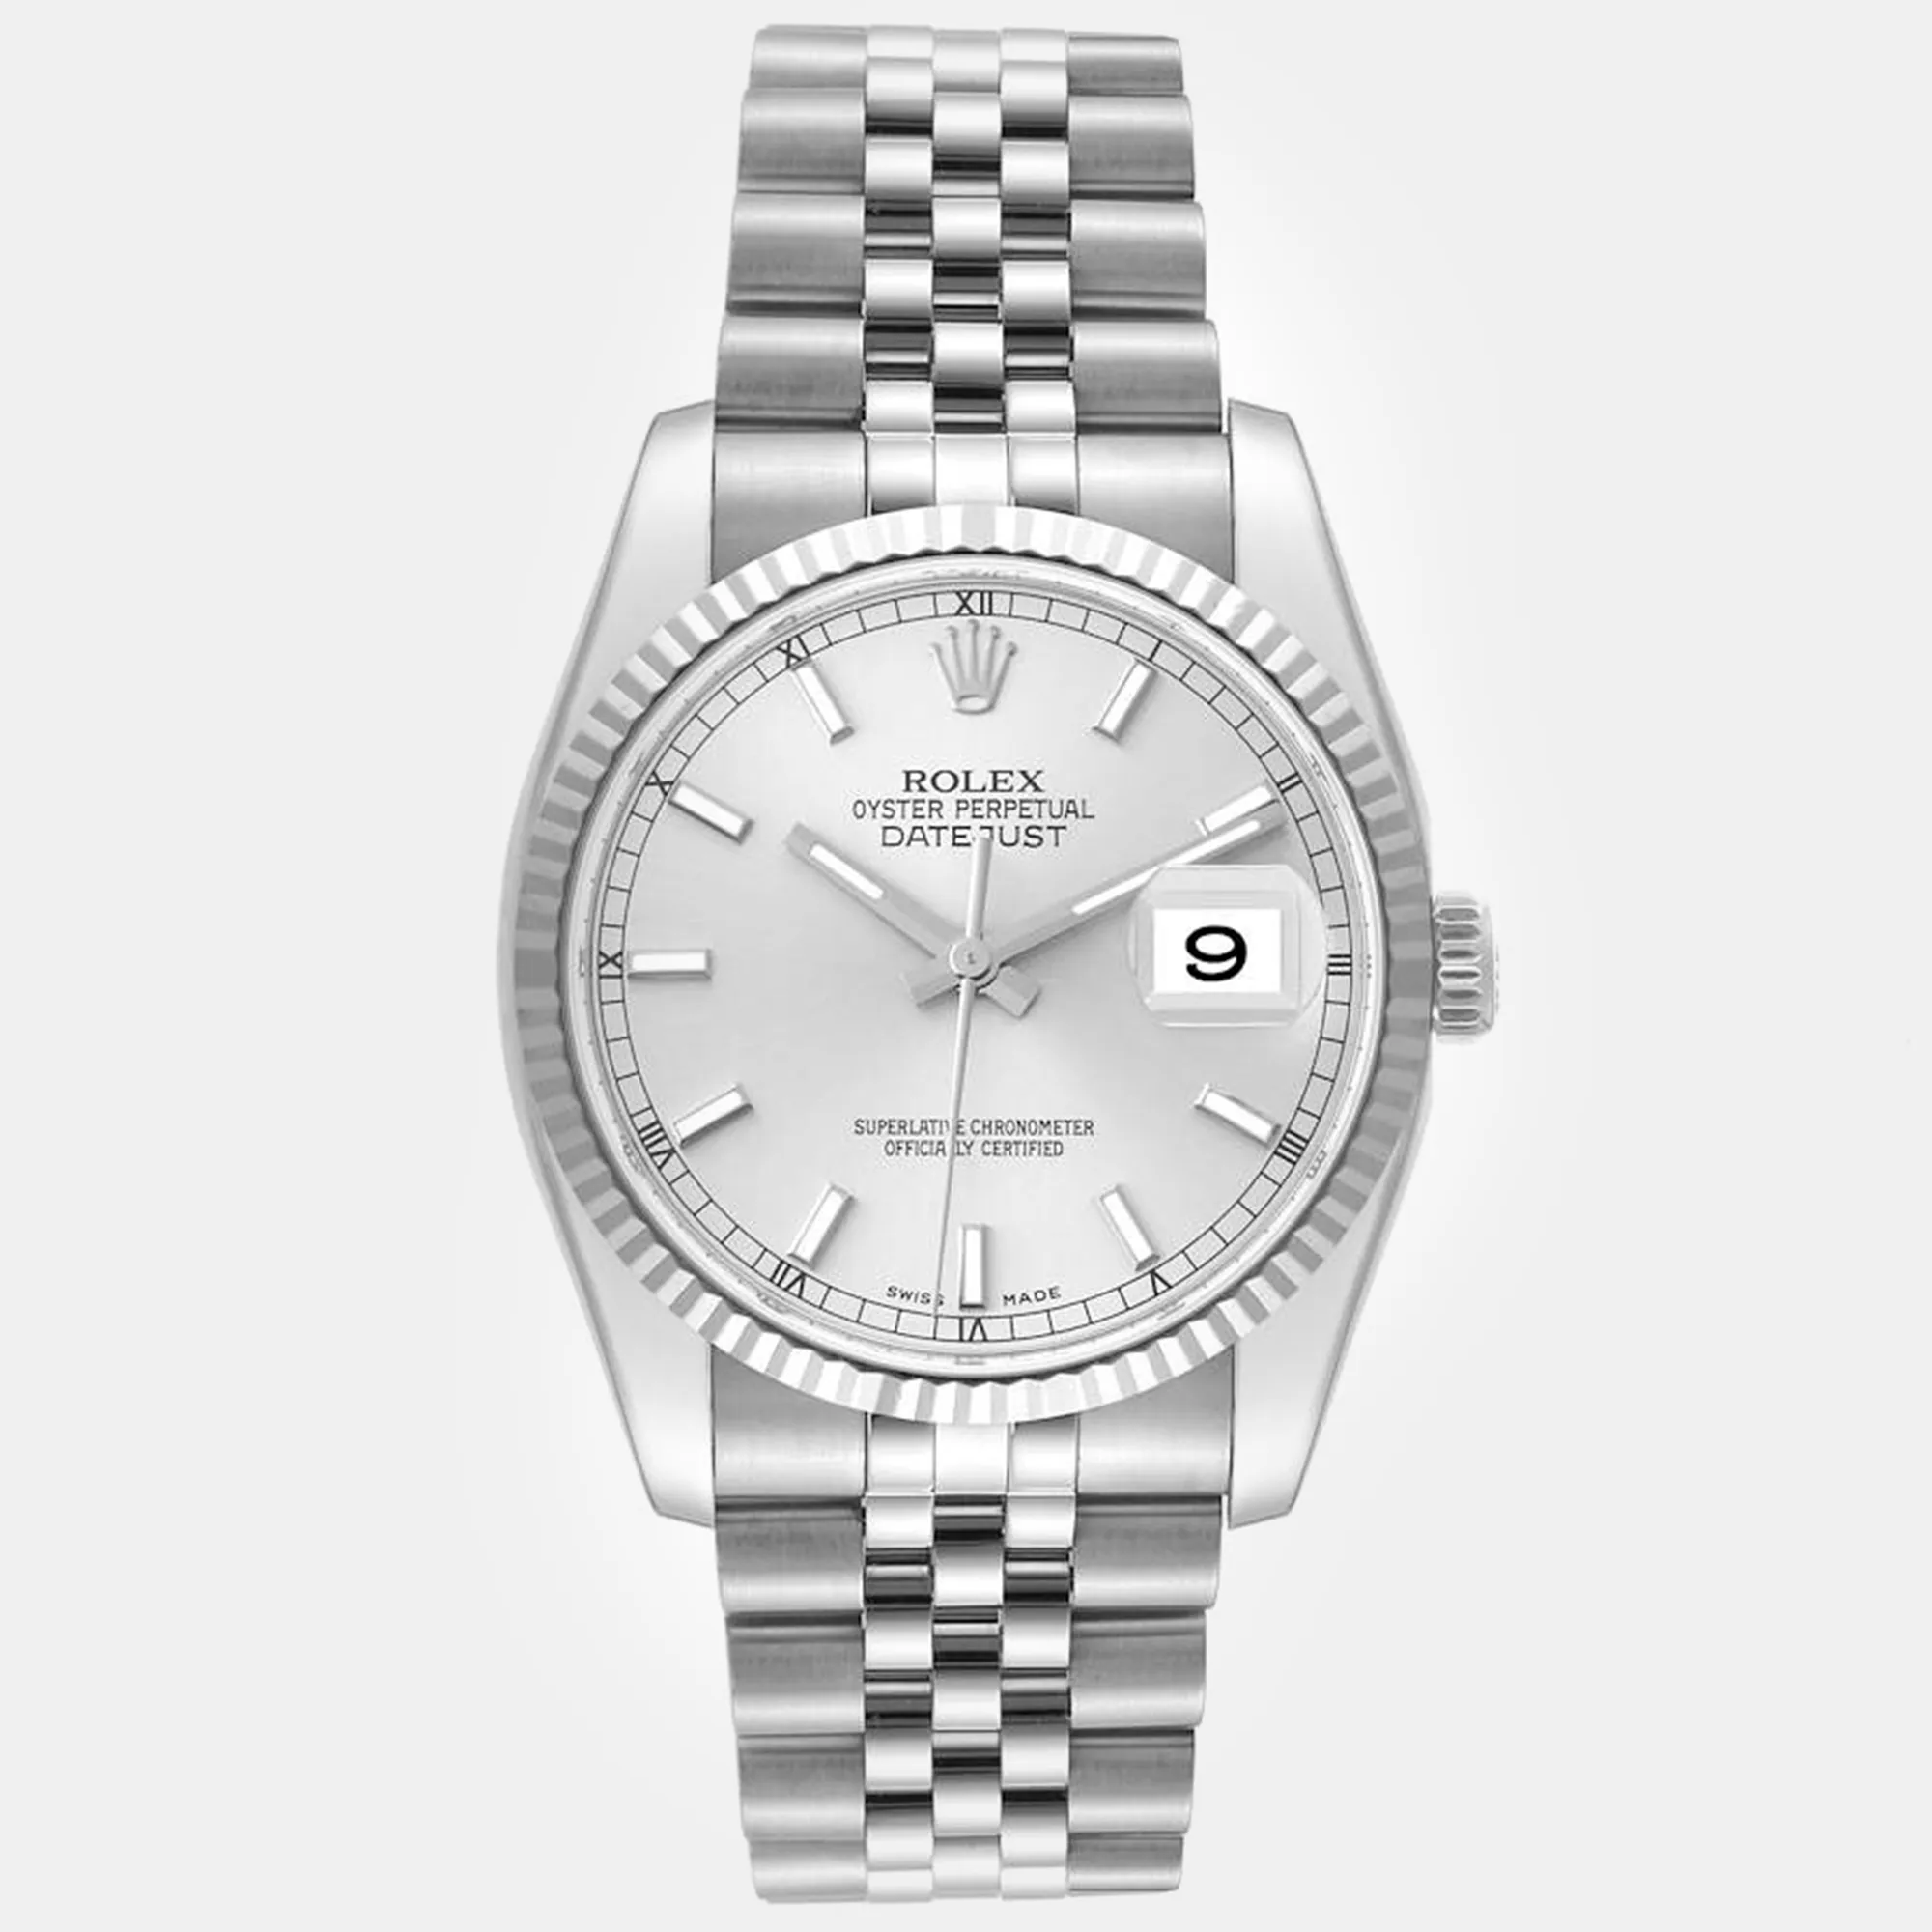 Rolex Datejust 36mm White gold and diamond-set Silver